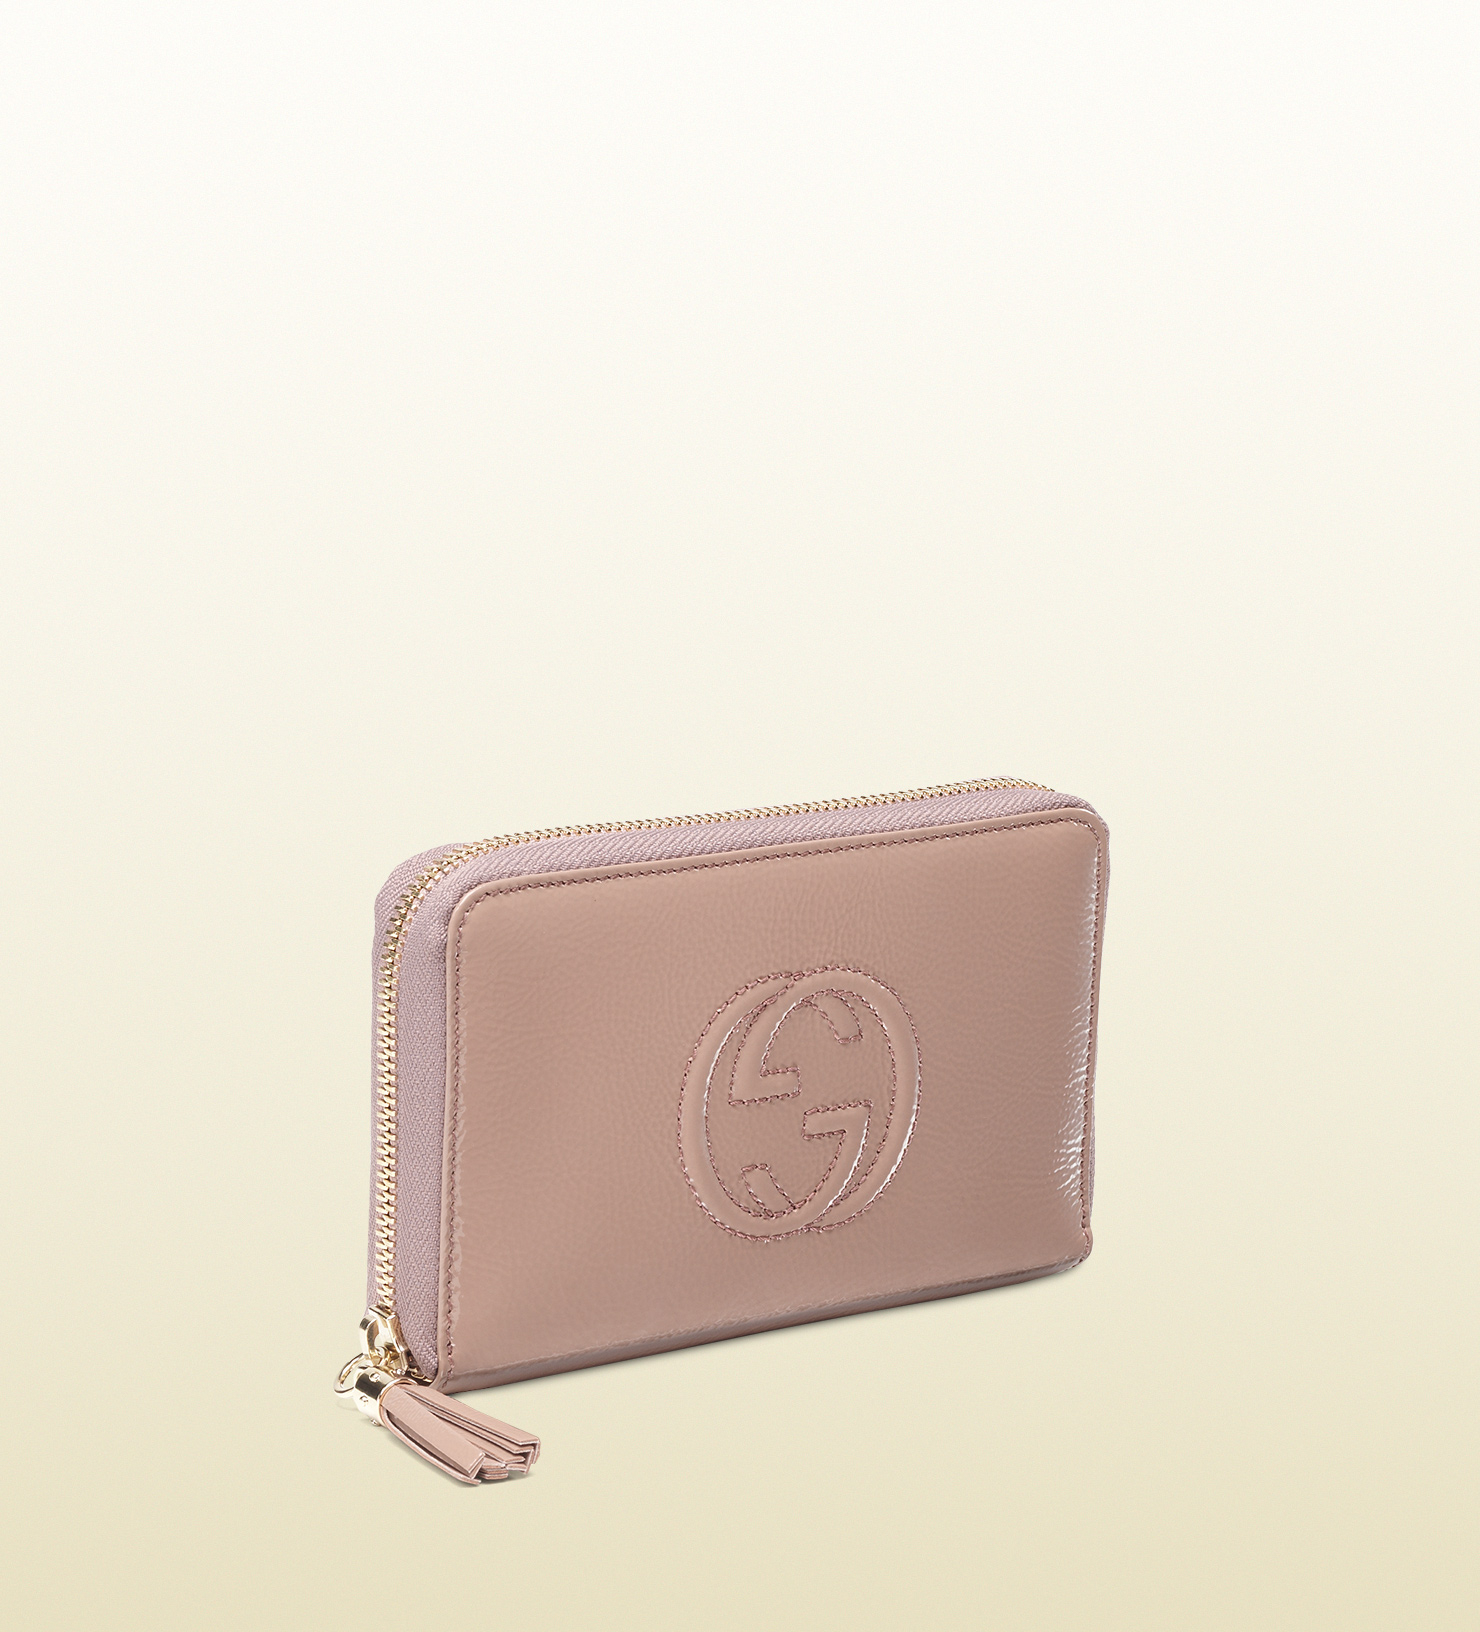 Gucci Soho Pale Pink Soft Patent Leather Medium Zip Around Wallet in Pink | Lyst